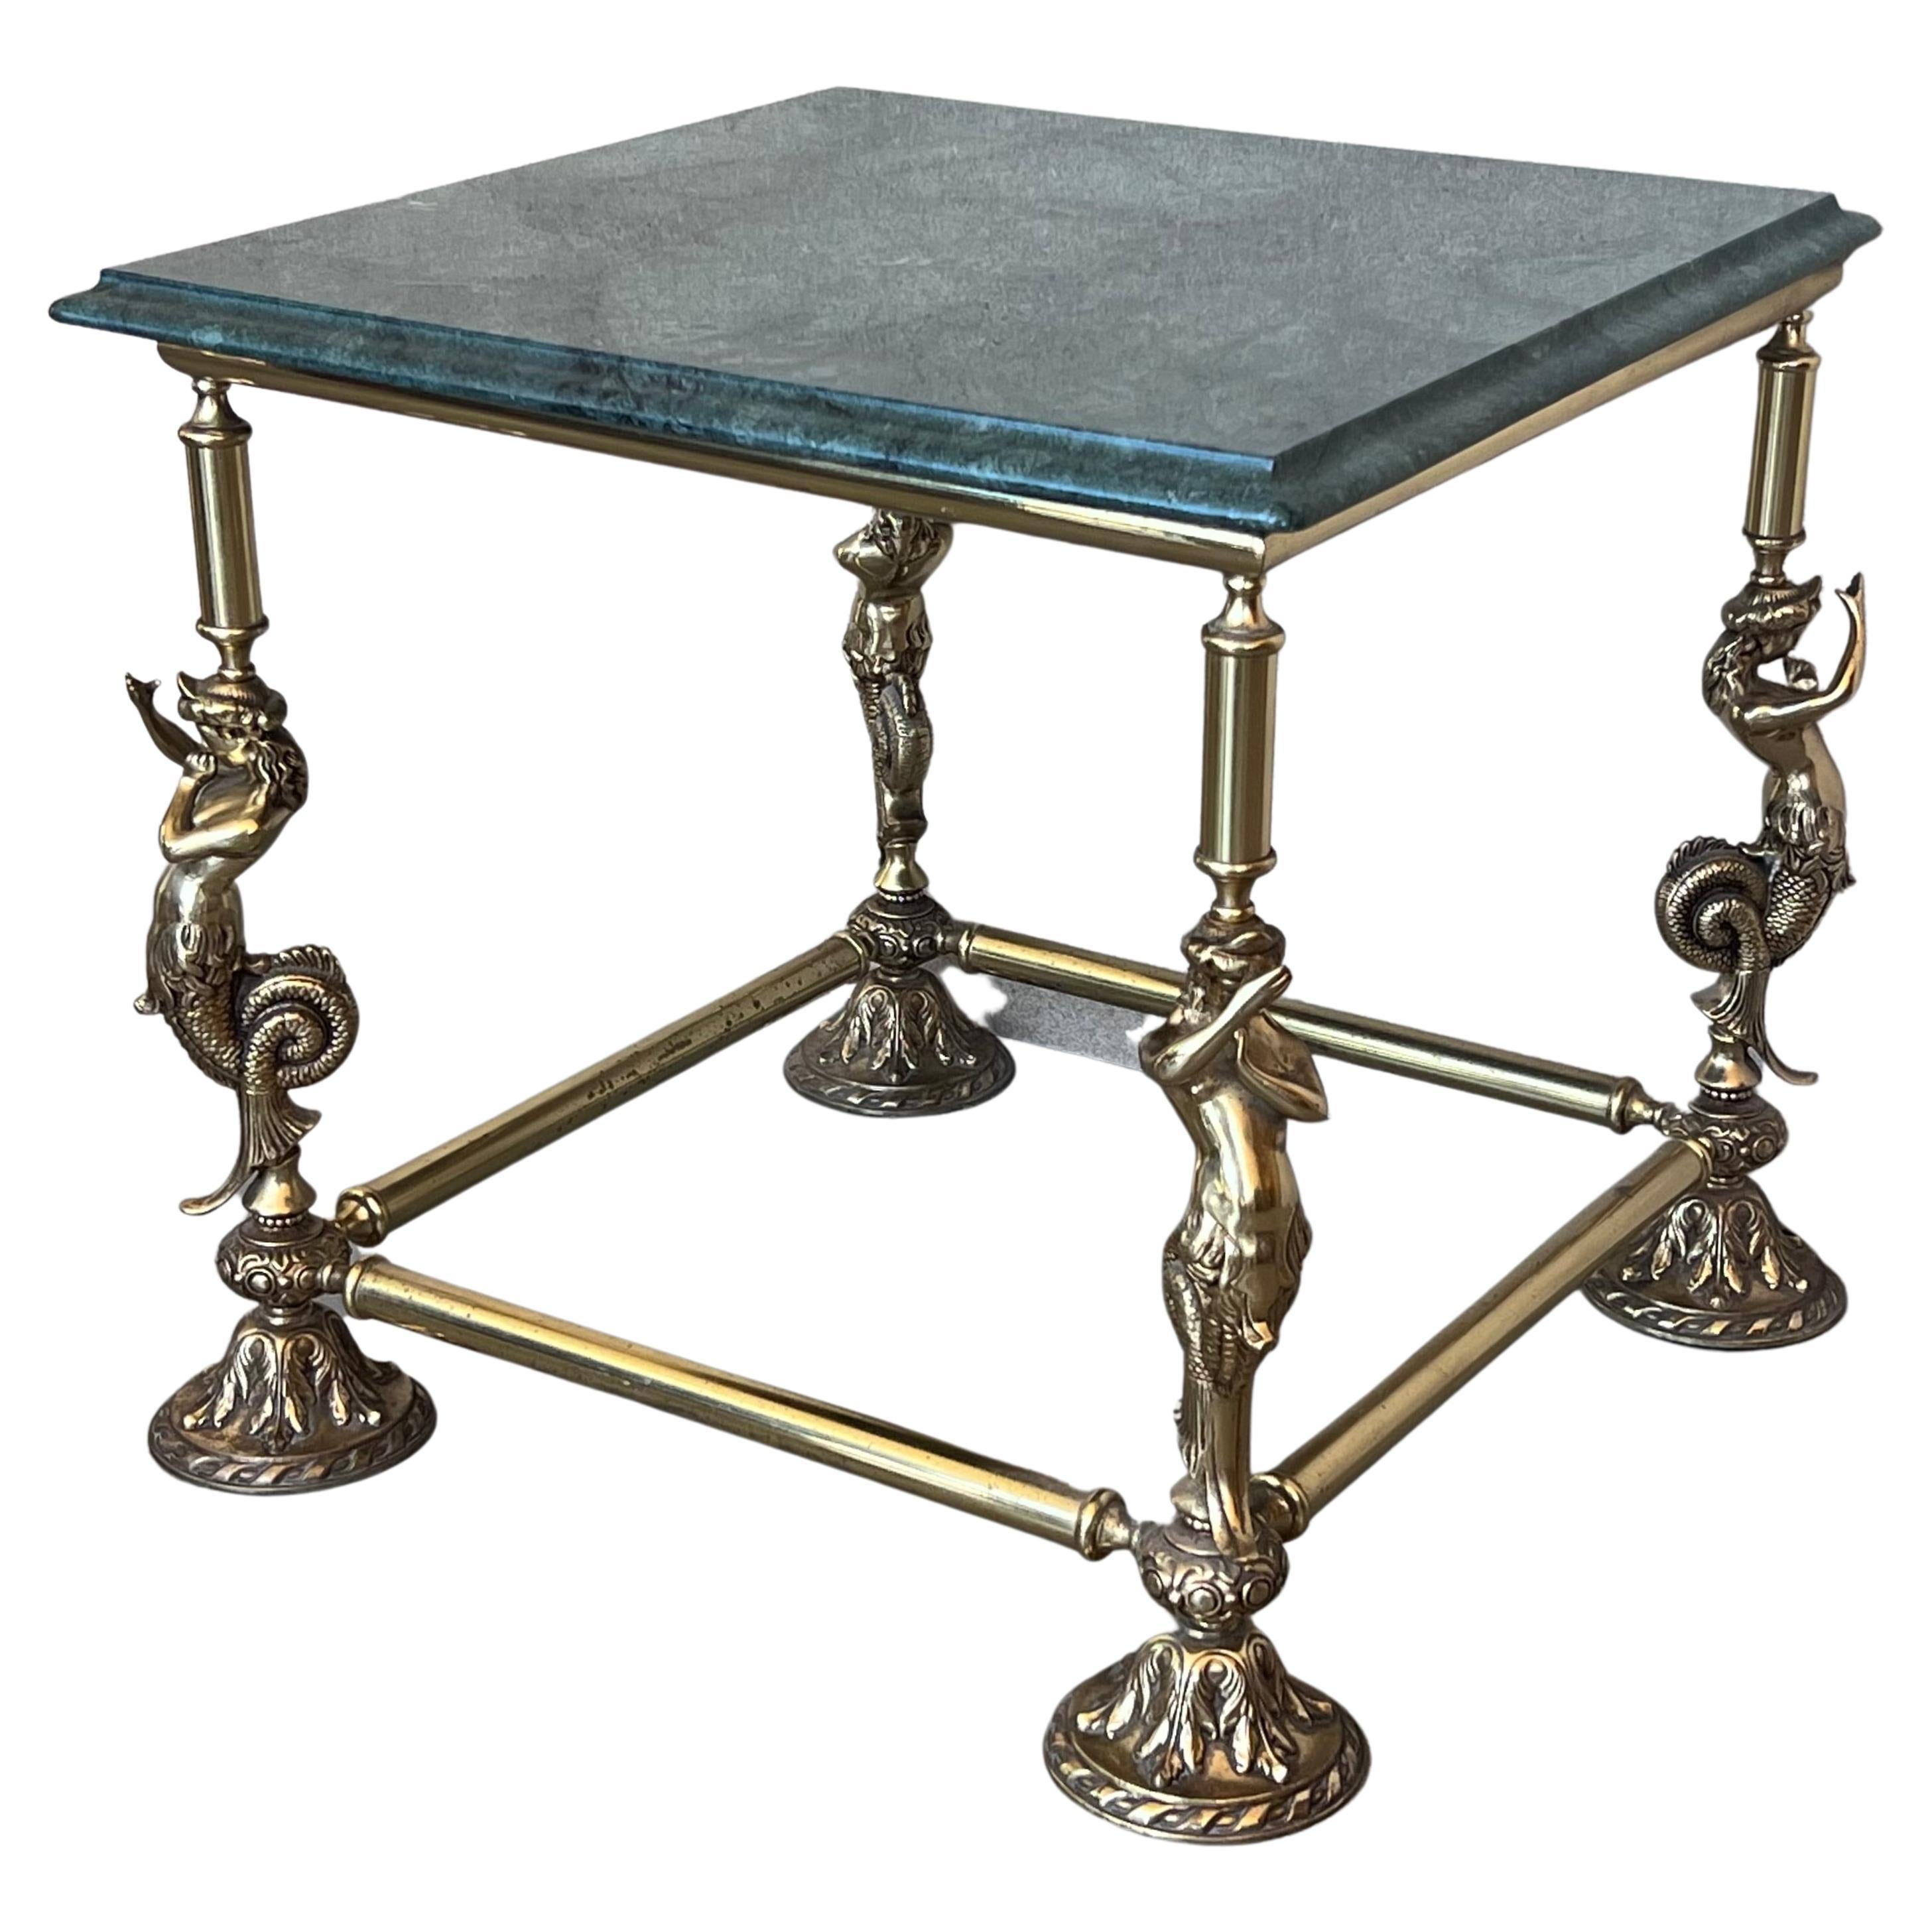 Italian Bronze Square Side Table with Green Marble Top, circa 1845 For Sale